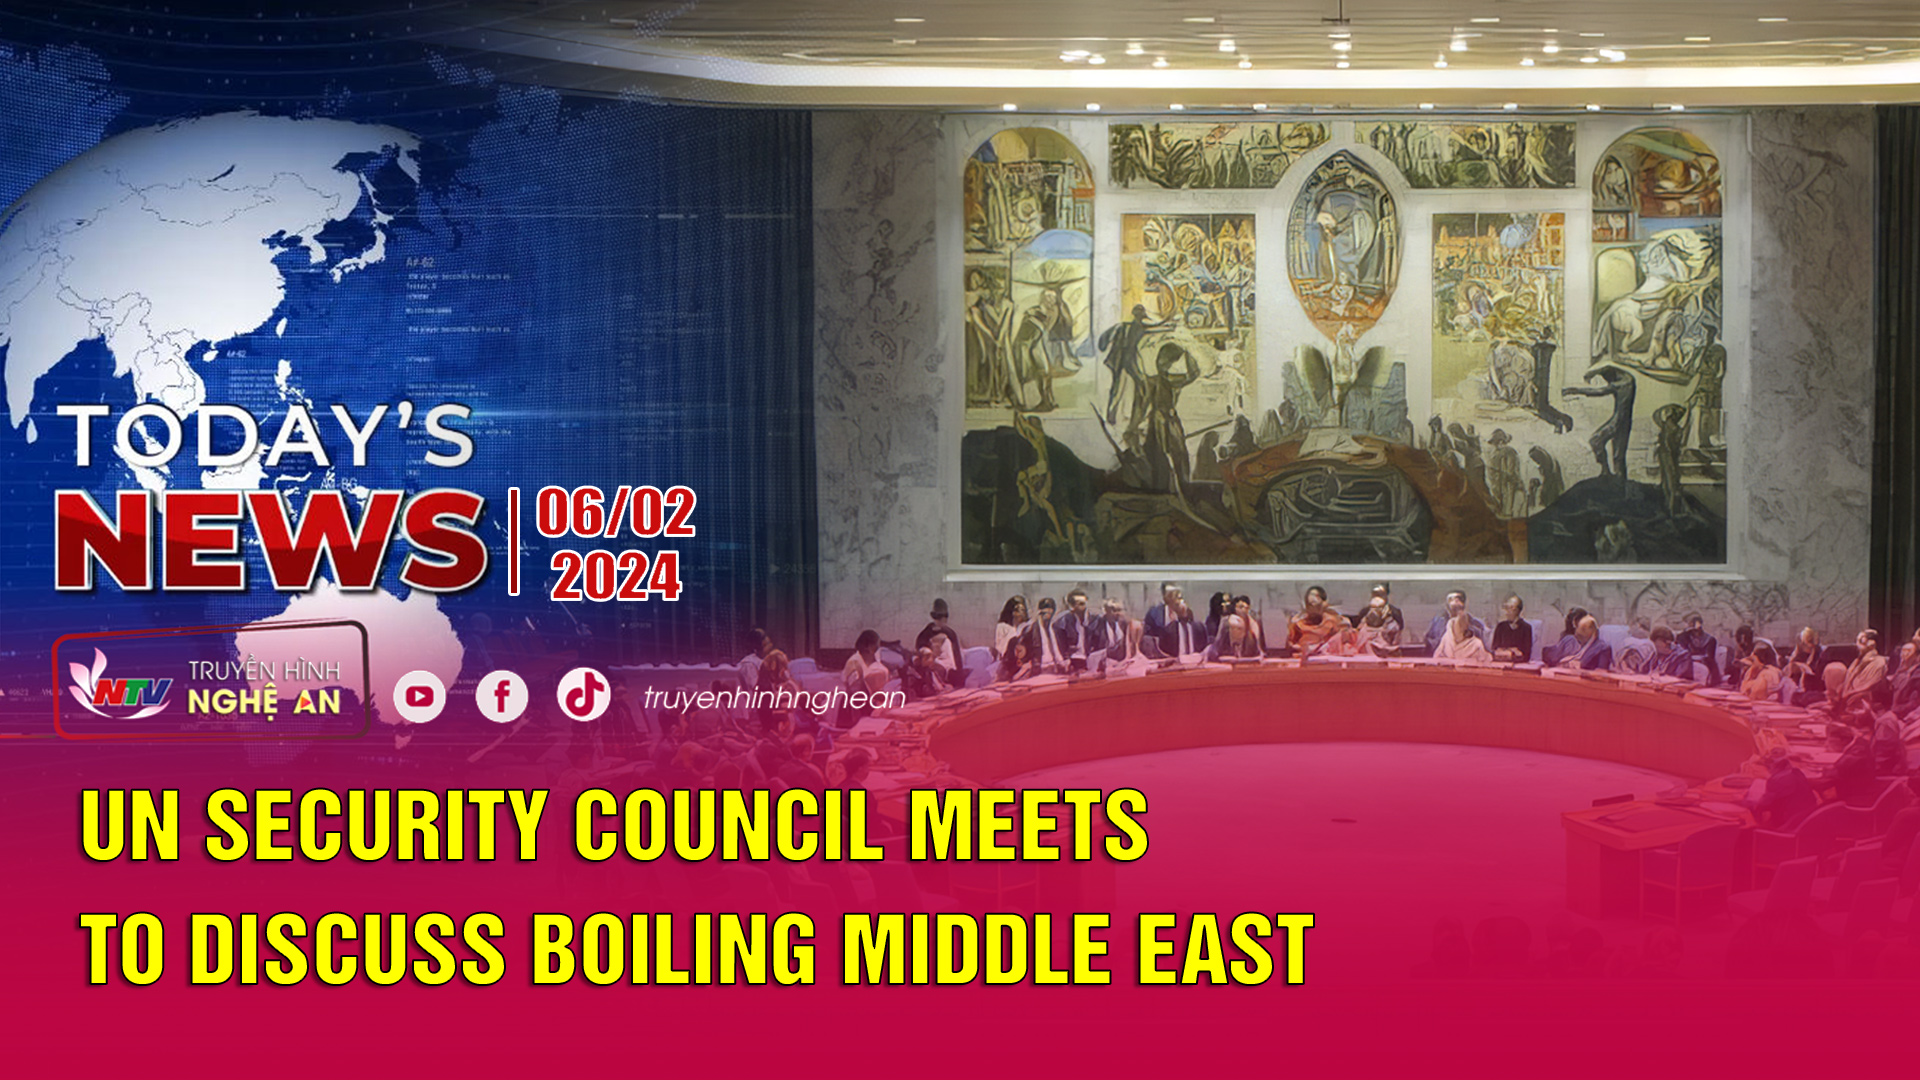 Today's News - 06/02/2024: UN Security Council meets to discuss boiling Middle East